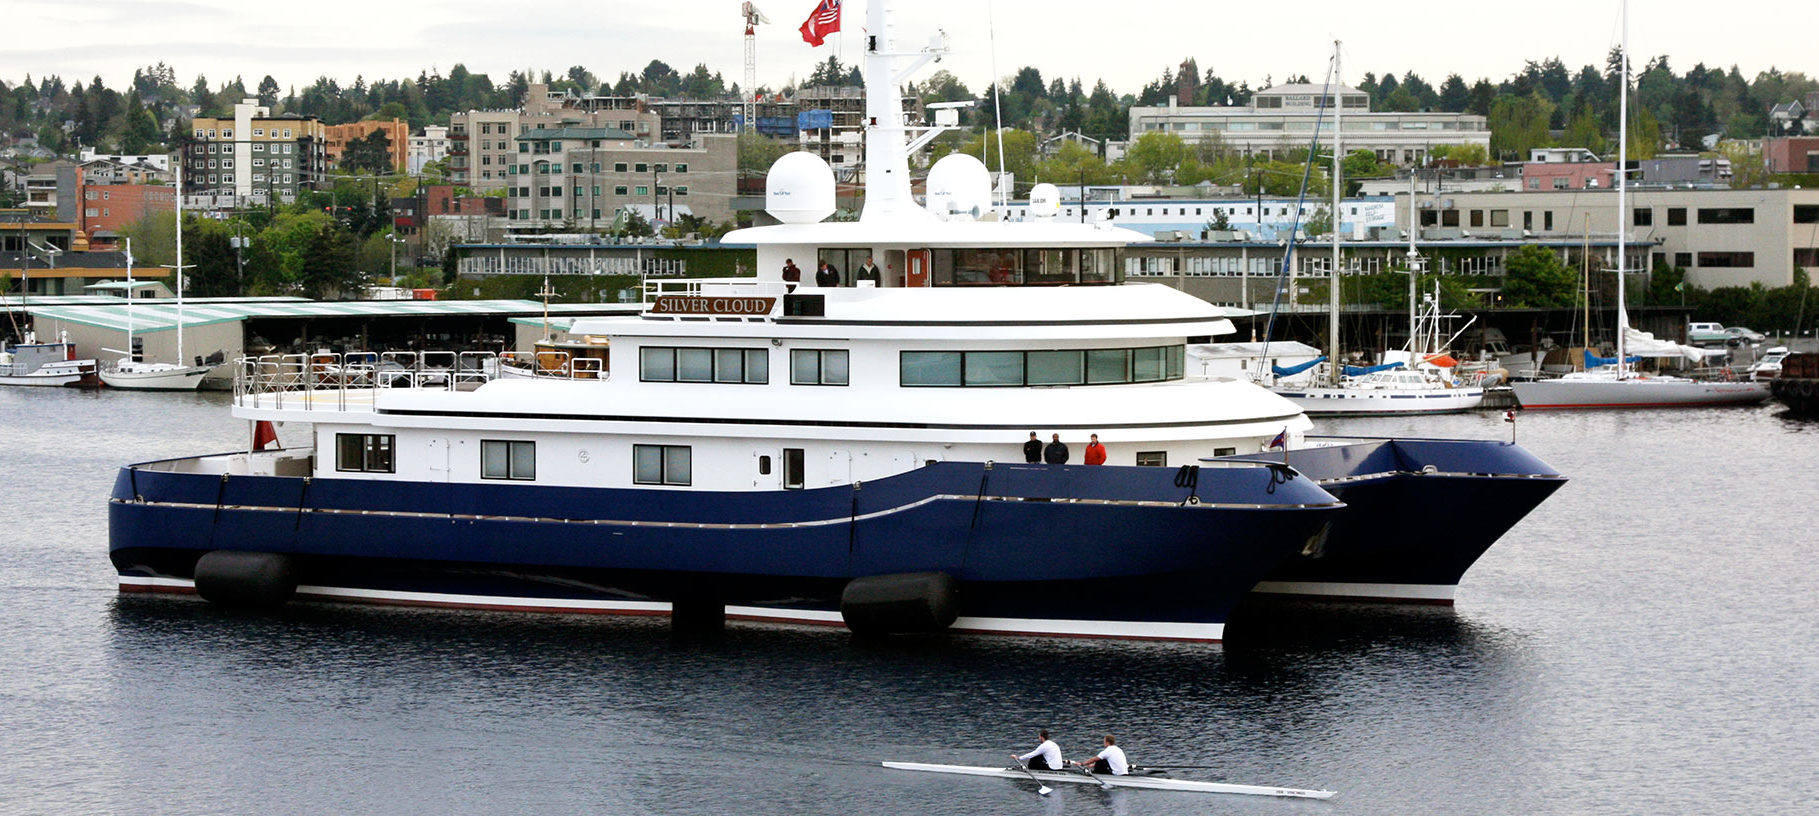 SBMC is your Homeport to the Pacific Northwest